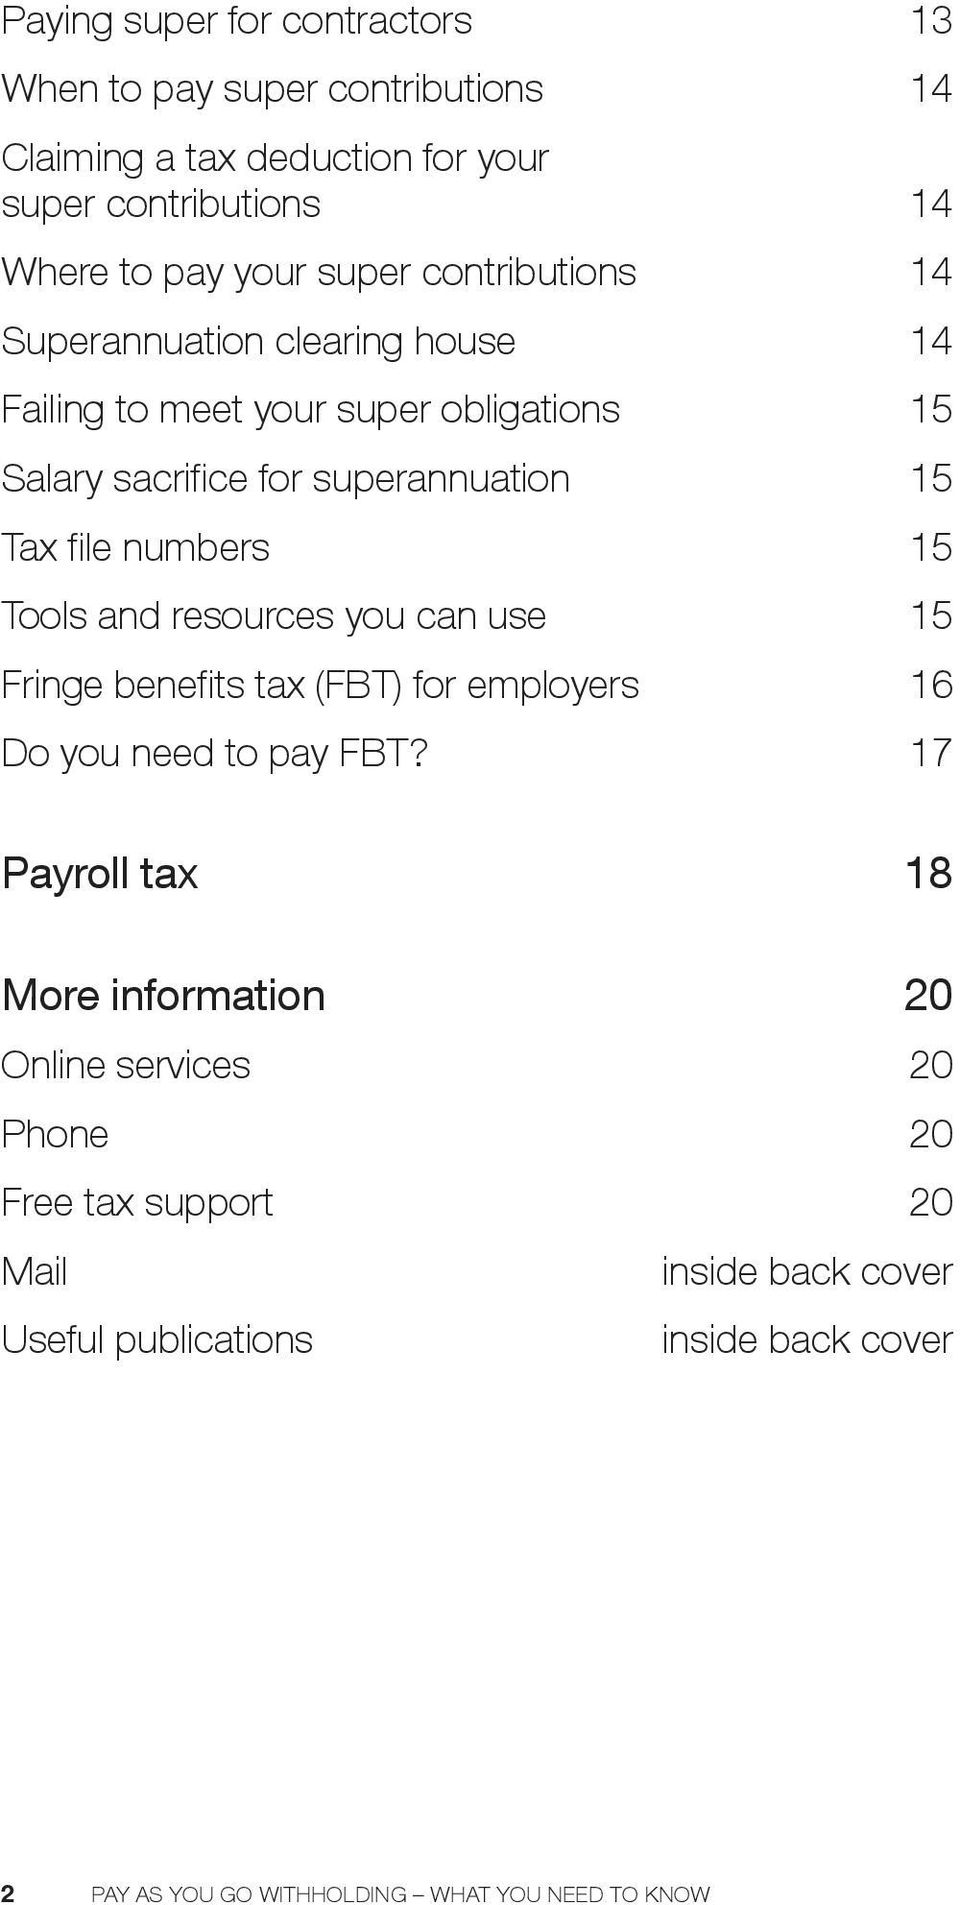 15 Tools and resources you can use 15 Fringe benefits tax (FBT) for employers 16 Do you need to pay FBT?